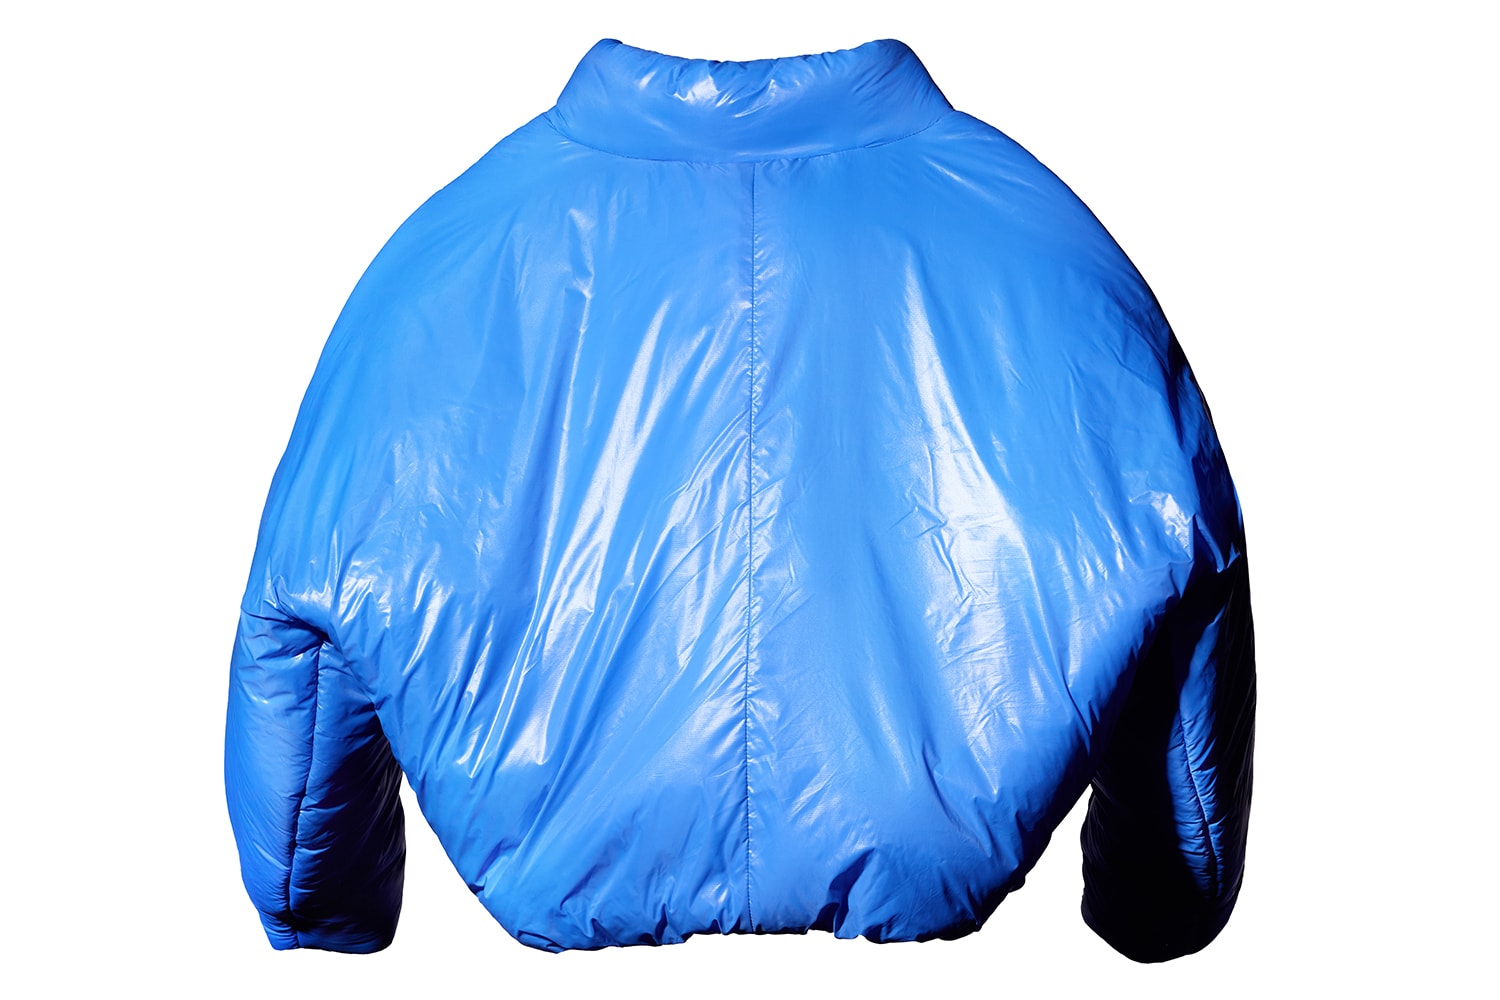 YEEZY Gap First Release Round Jacket Announcement Kanye West Projections Locations Info Date Buy Price Blue